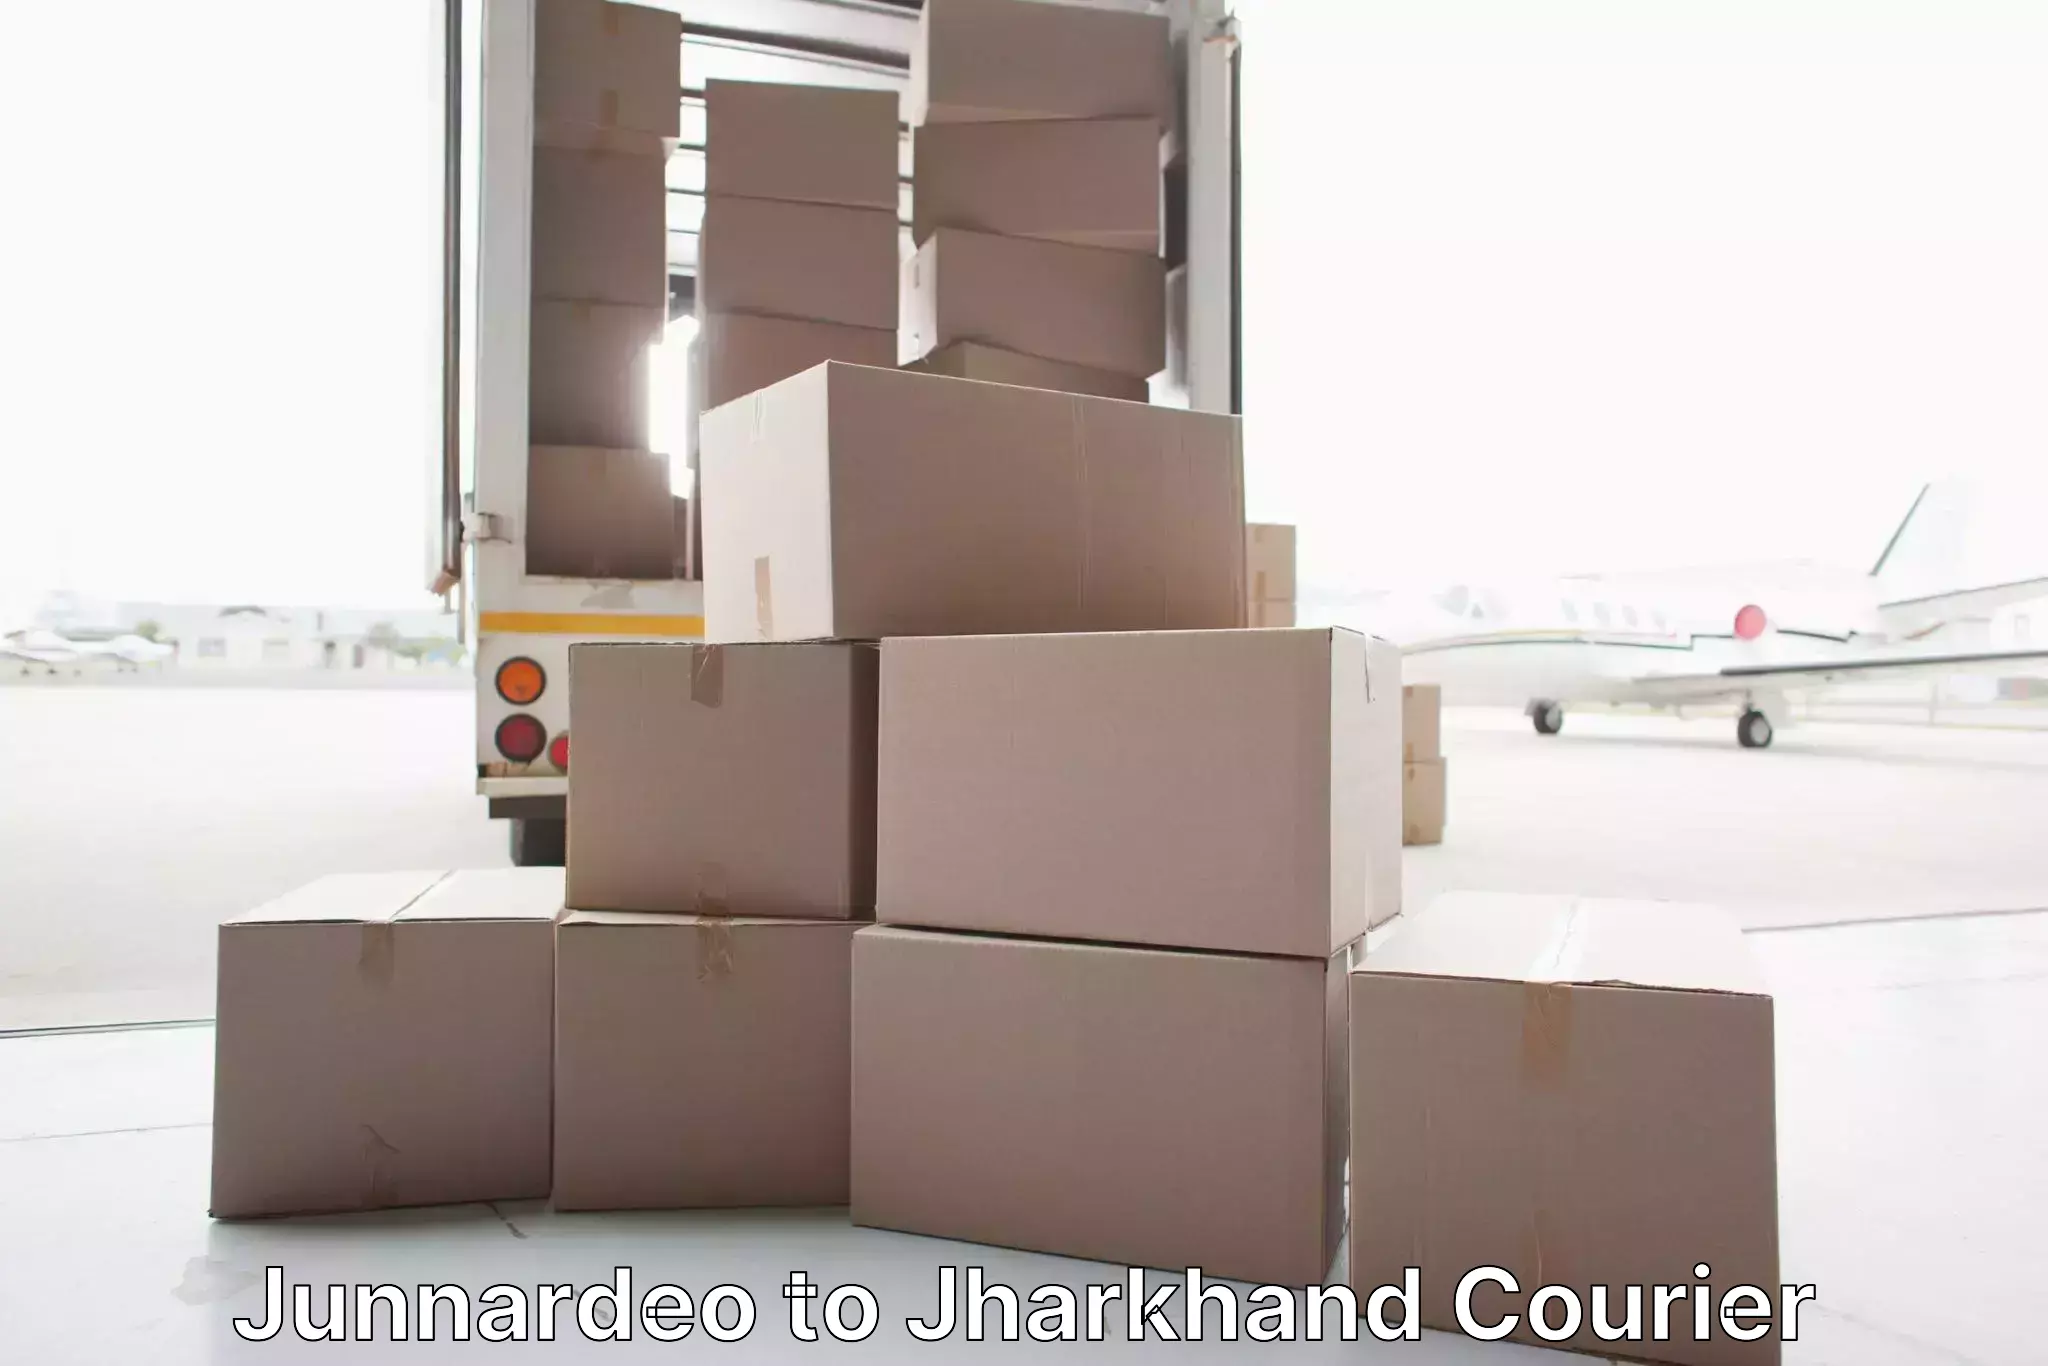 Household moving experts Junnardeo to Jharkhand